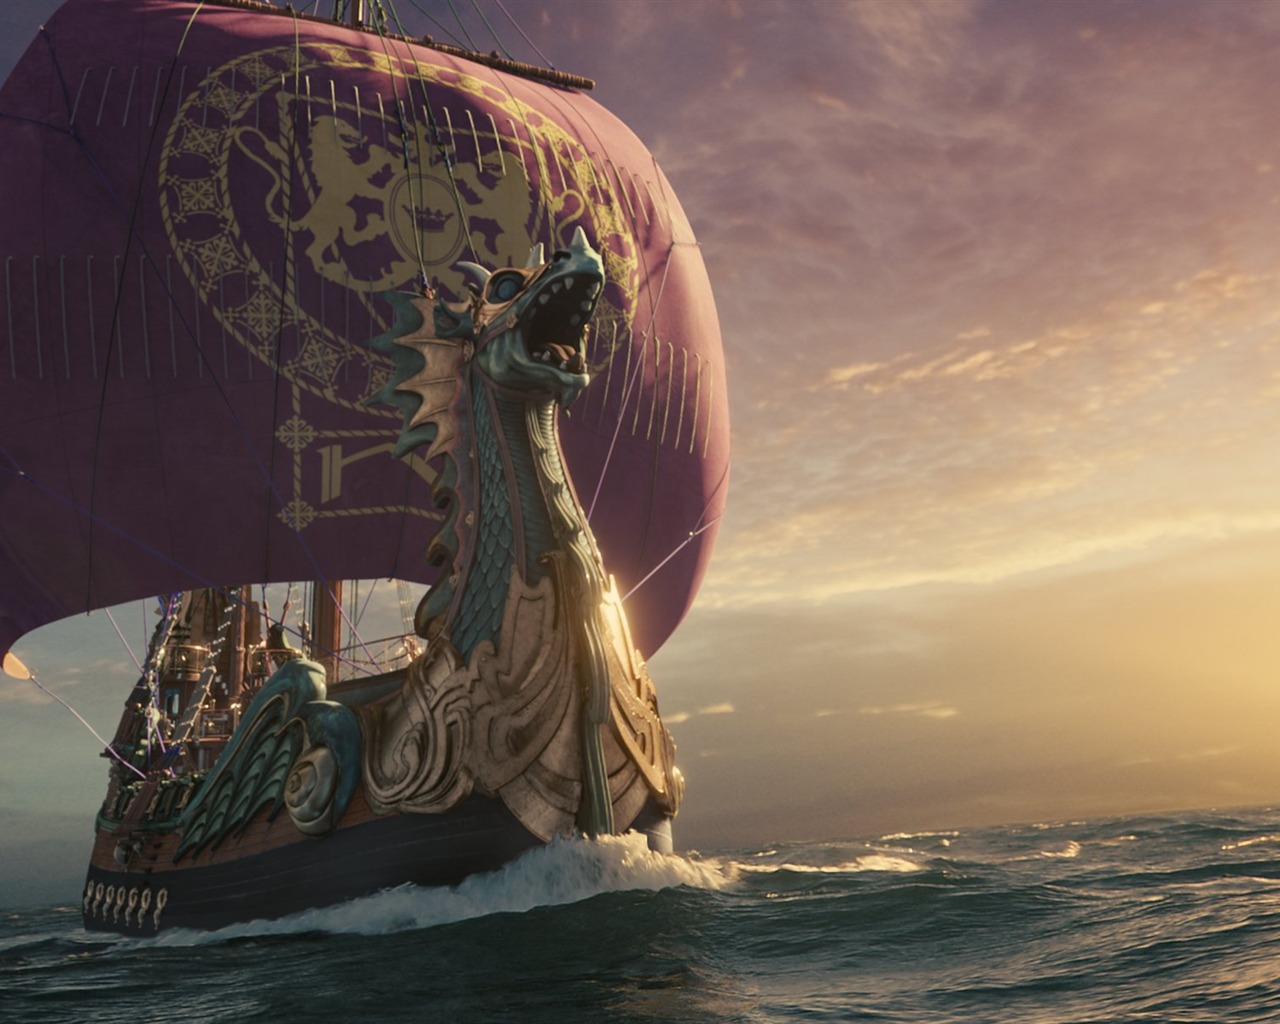 The Chronicles of Narnia: The Voyage of the Dawn Treader wallpapers #4 - 1280x1024